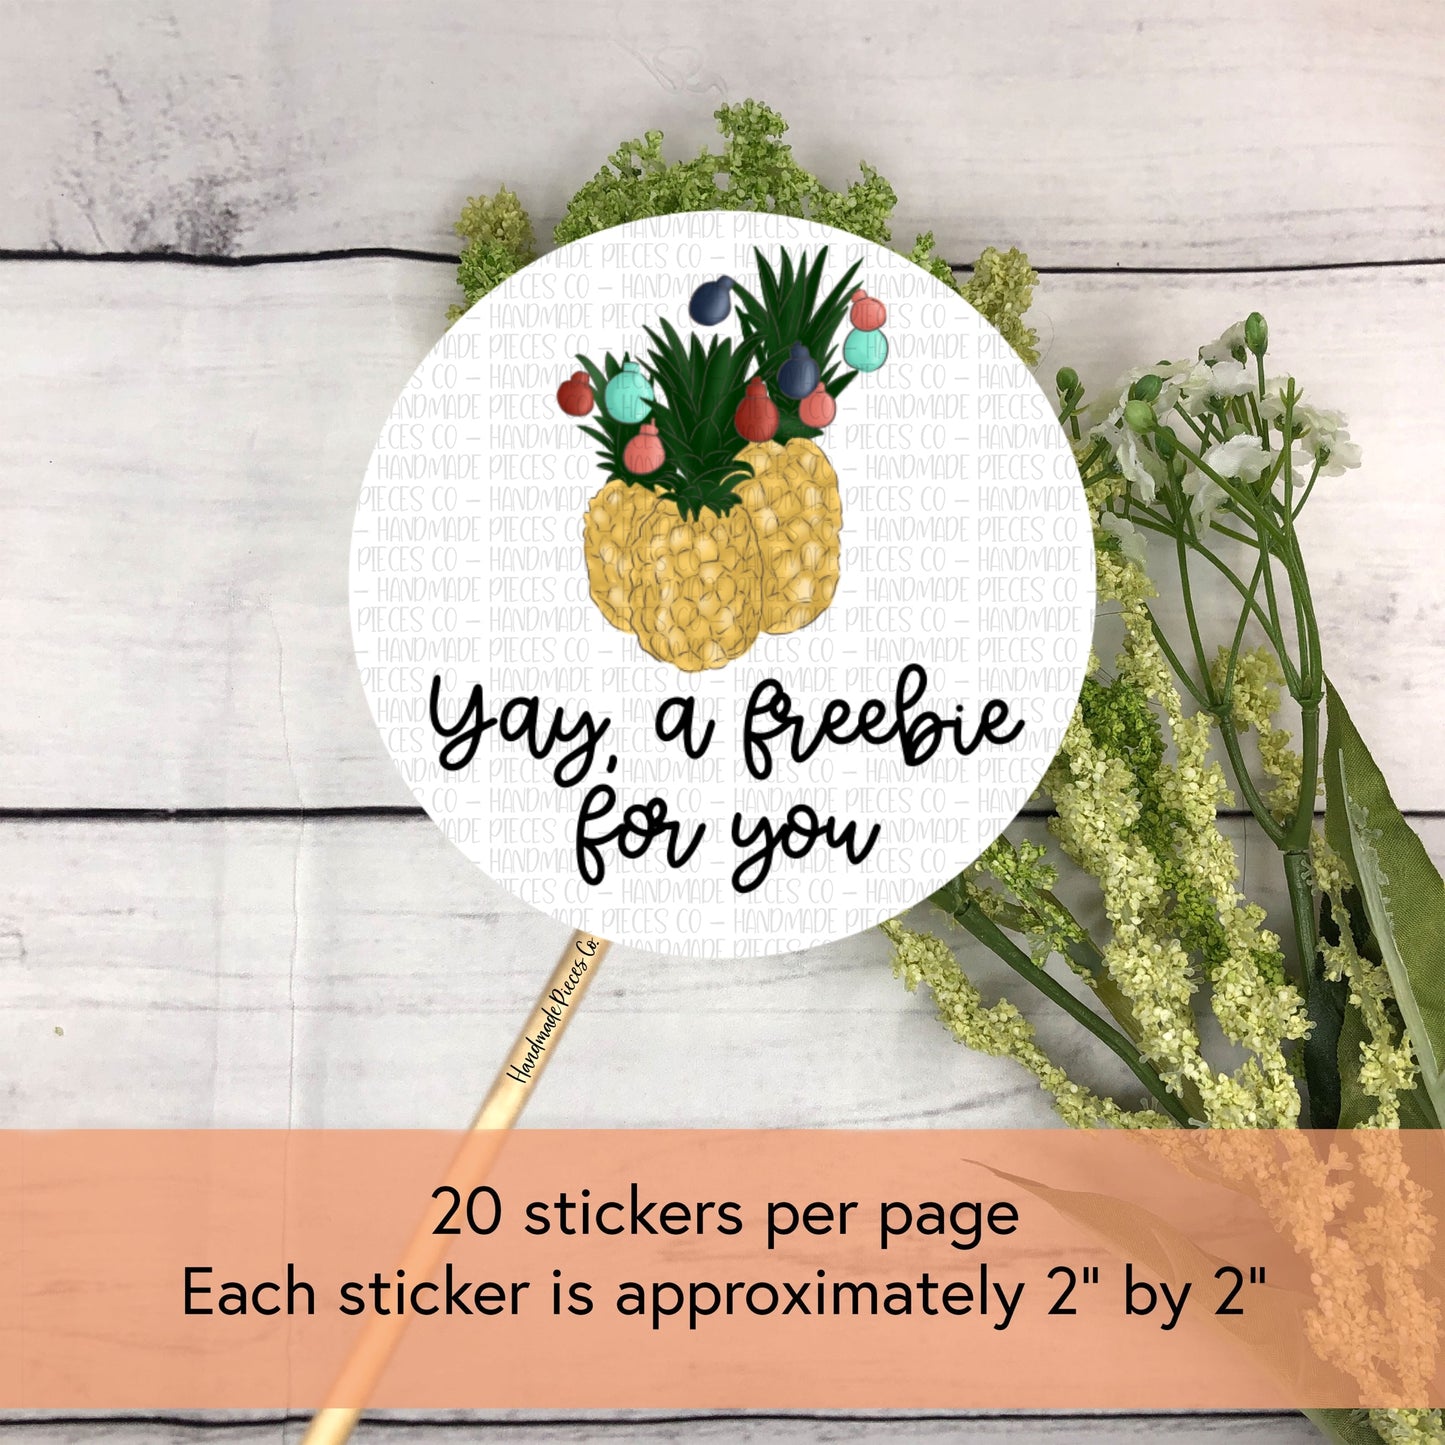 Yay, A Freebie For You - Packaging Sticker, Christmas in July Theme